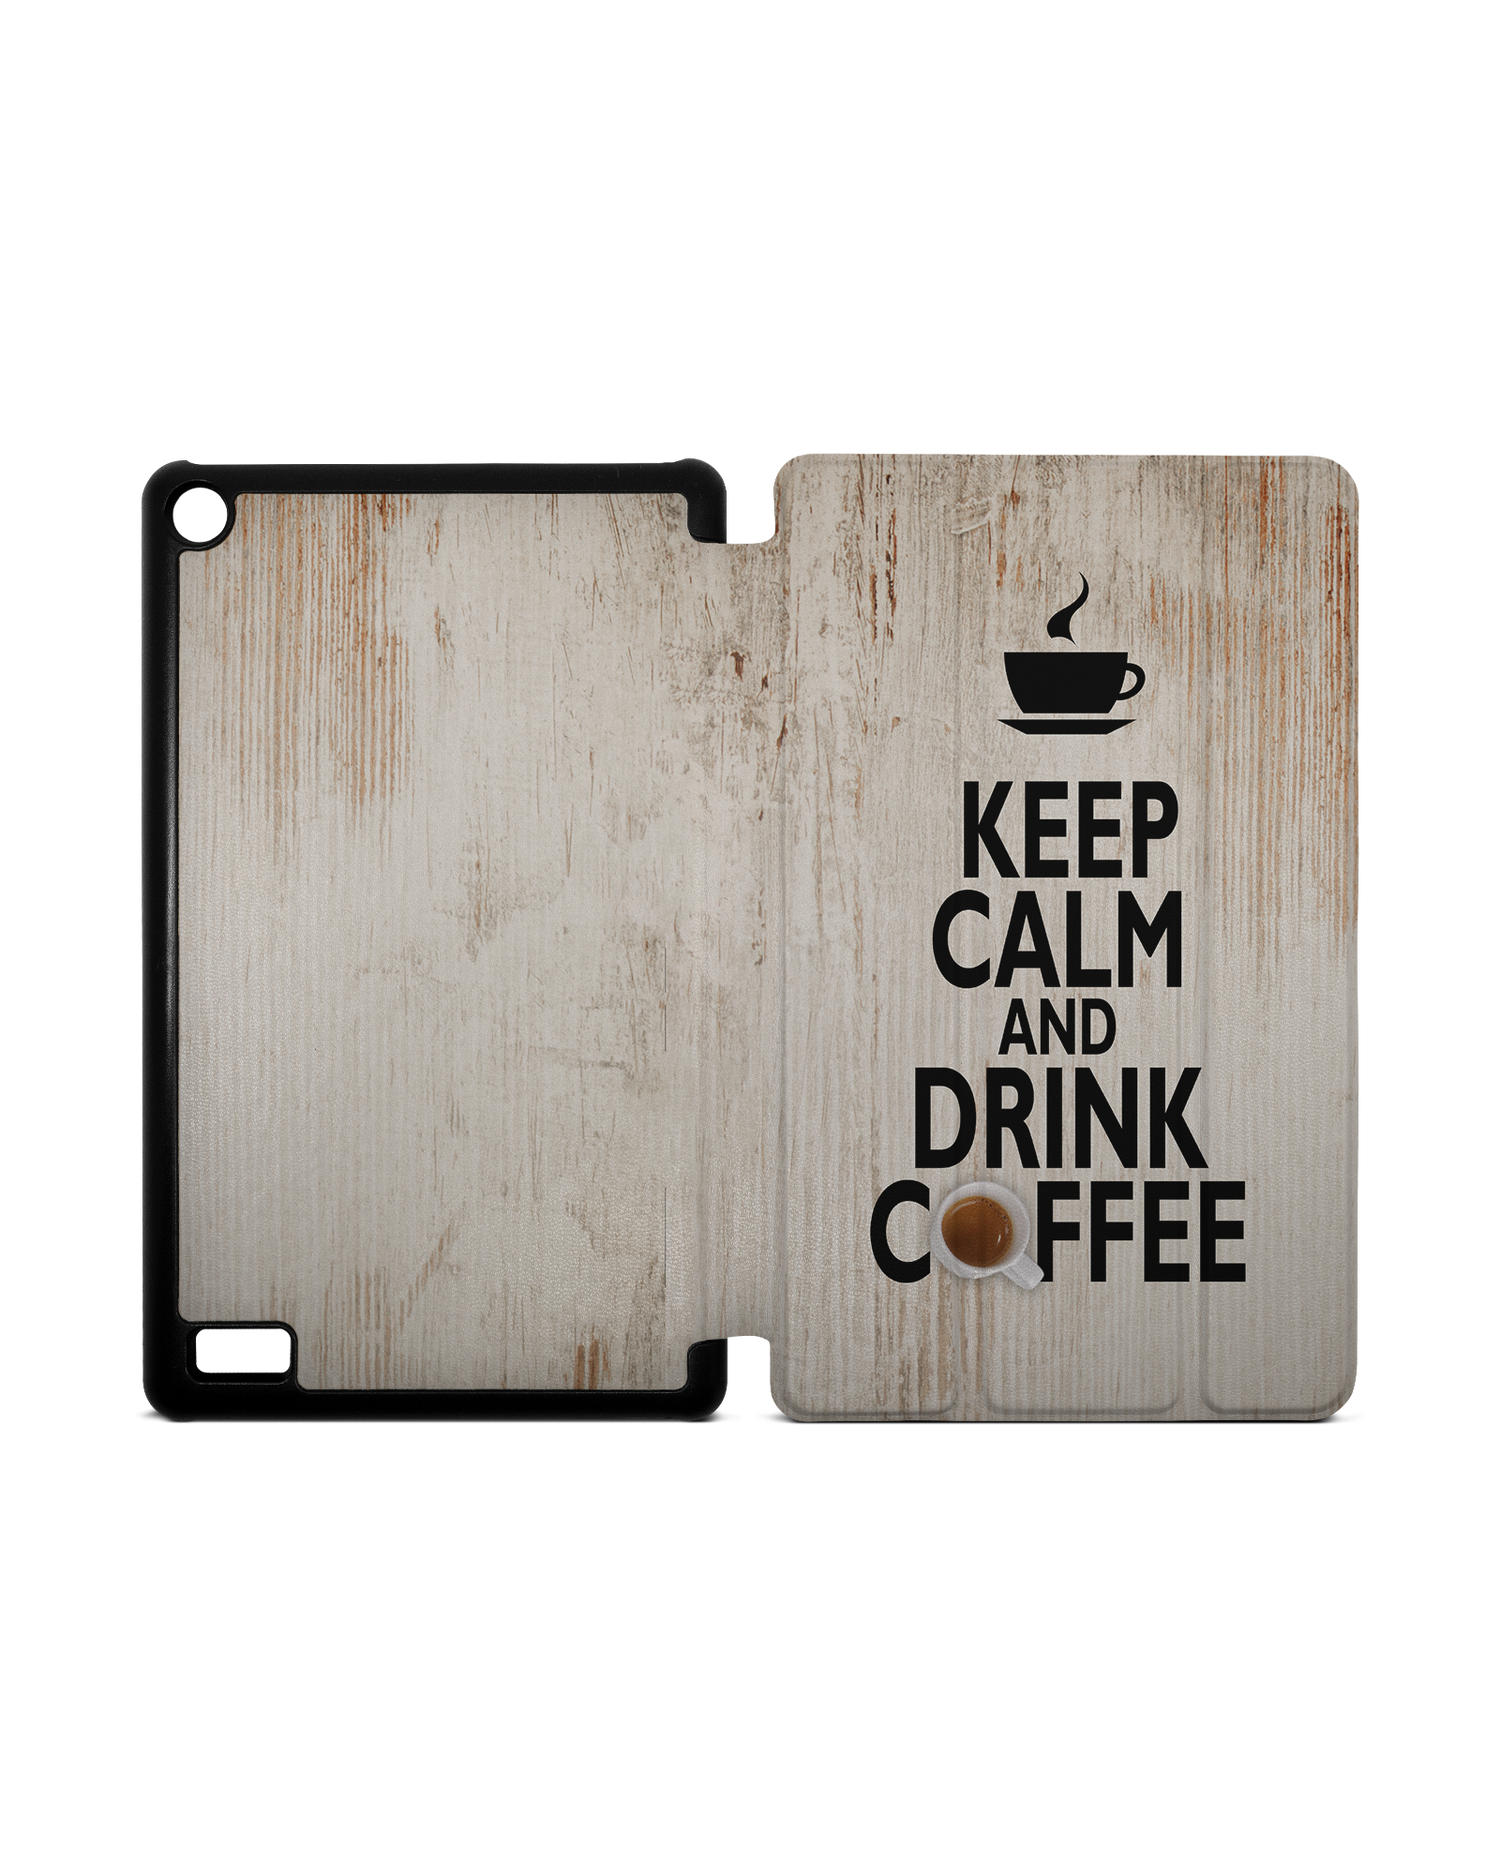 Drink Coffee Tablet Smart Case for Amazon Fire 7: Opened